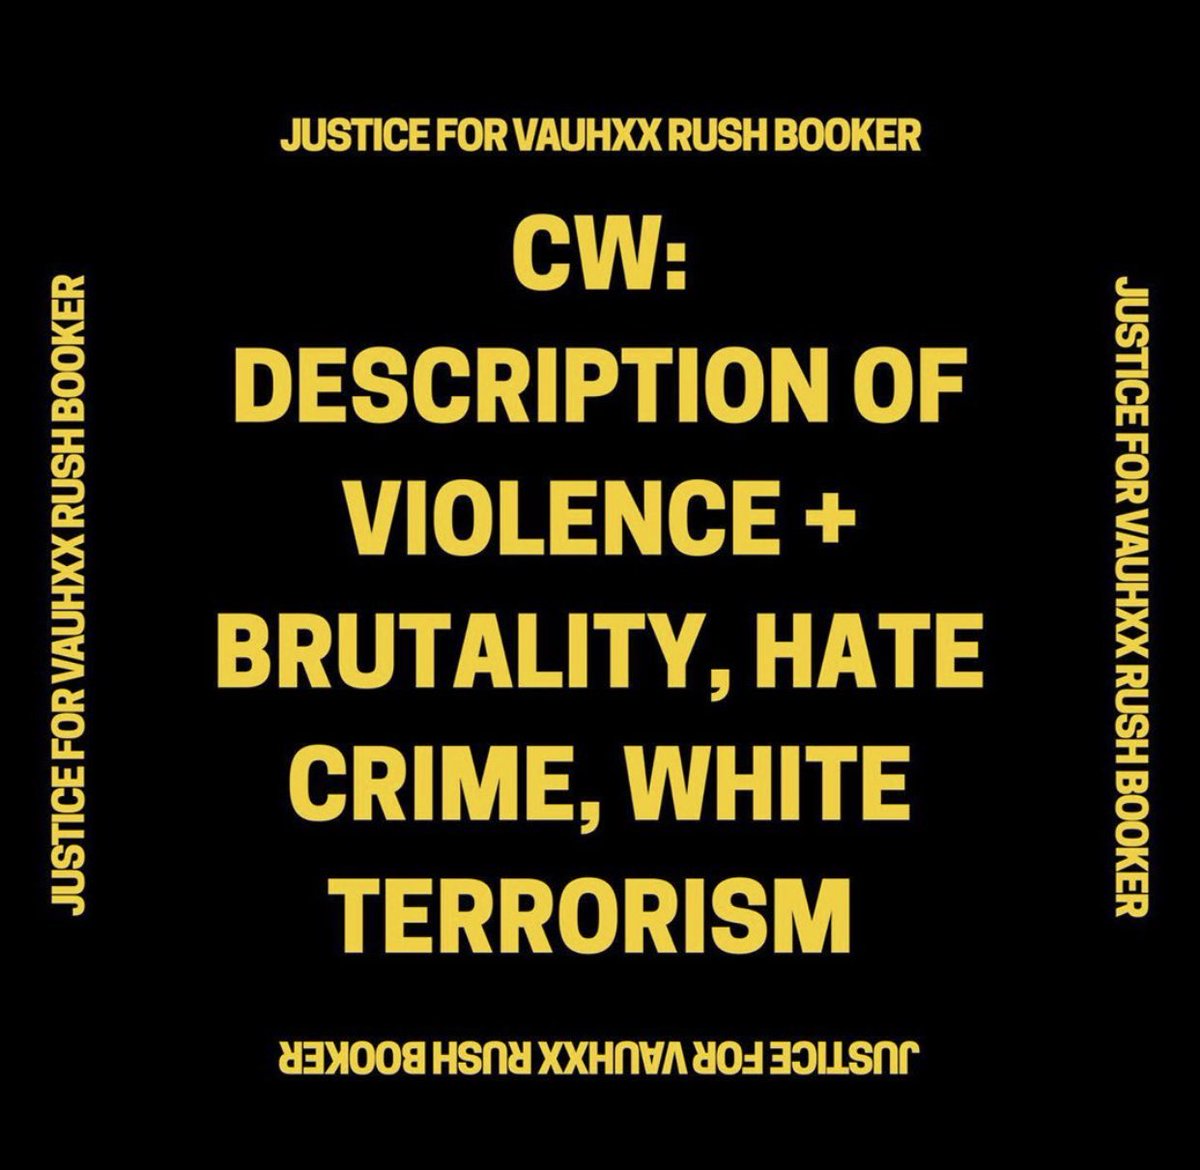 take a moment today to demand justice for vauhxx rush booker, a black man nearly lynched this week in bloomington, indiana. it’s a miracle he’s alive. we need to demand the arrests of these heinously racist and violent men before they strike again. more info below